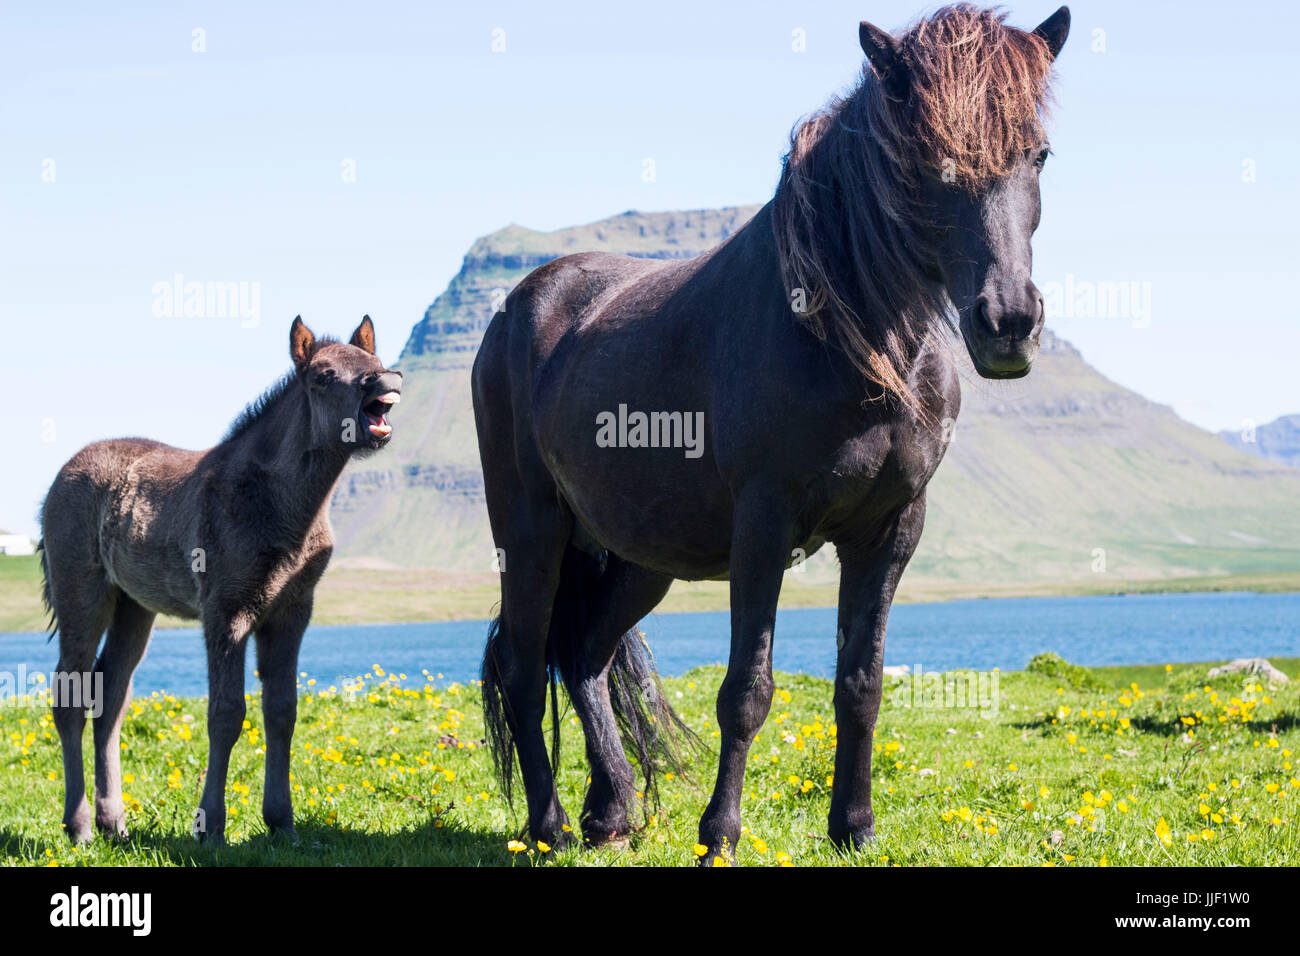 Horse and her foal standing in a field, Iceland Stock Photo